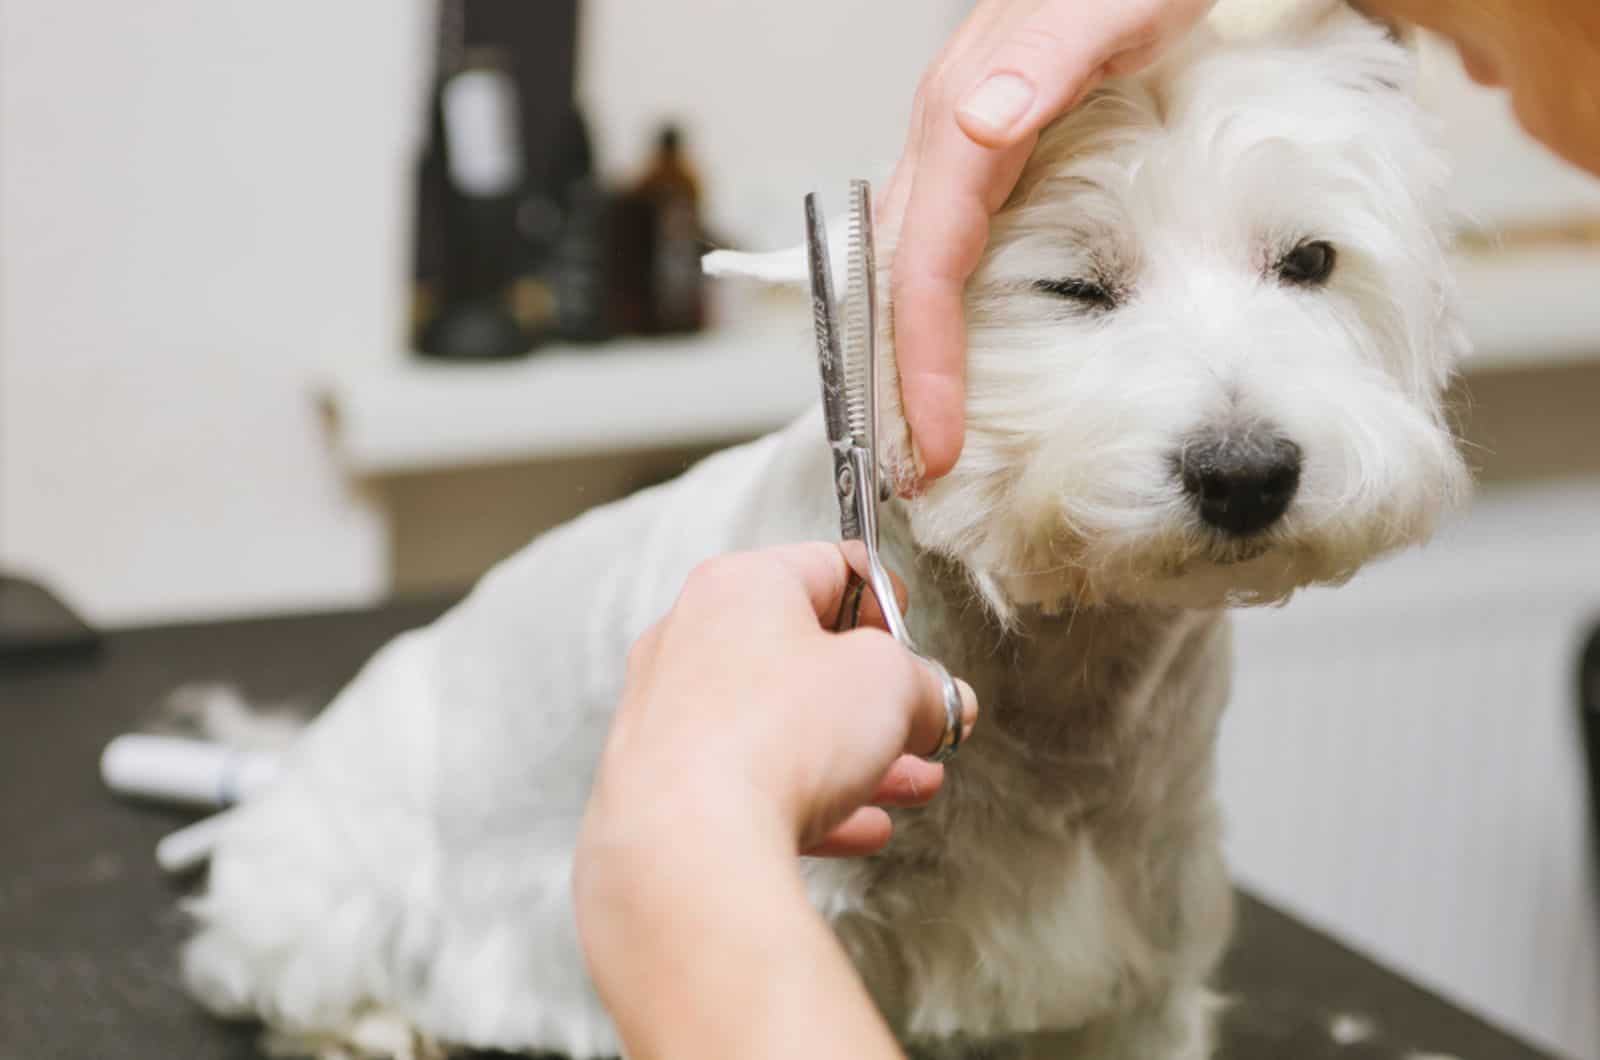 west highland white terrier dog having a haircut in grooming salon